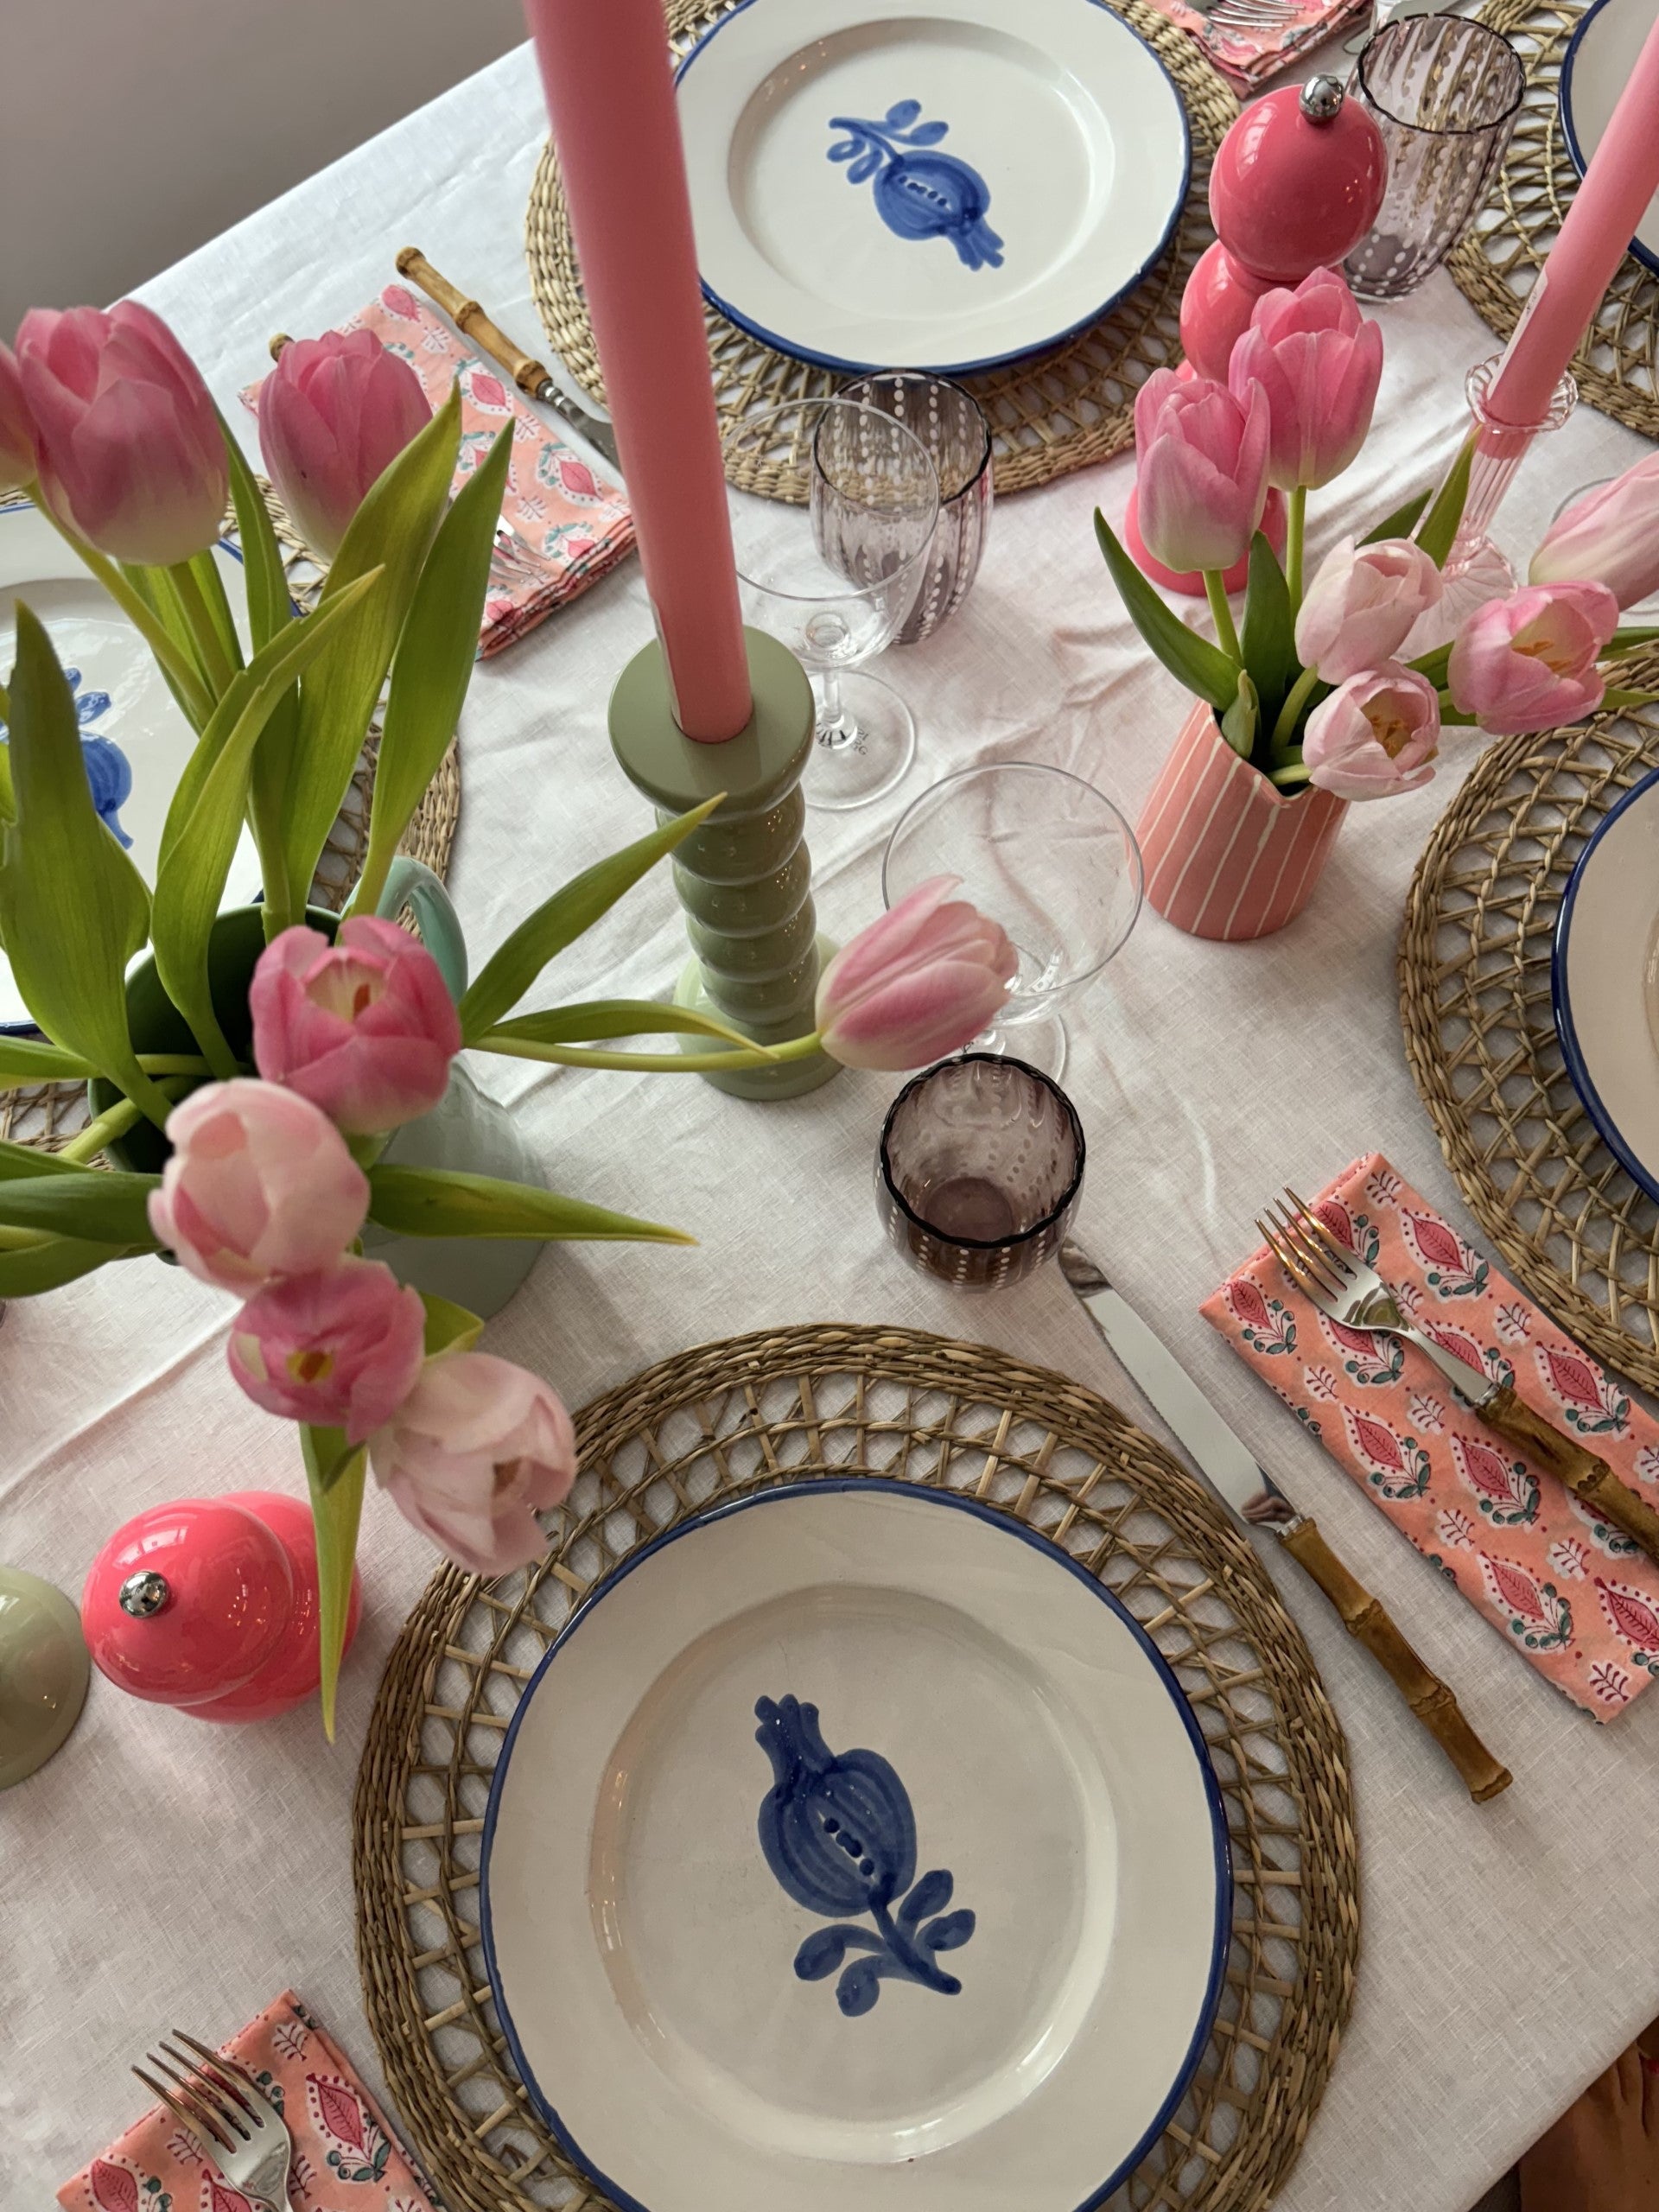 A pink table setting for Valentine's Day with fresh pink tulips in vases and pink block printed napkins.